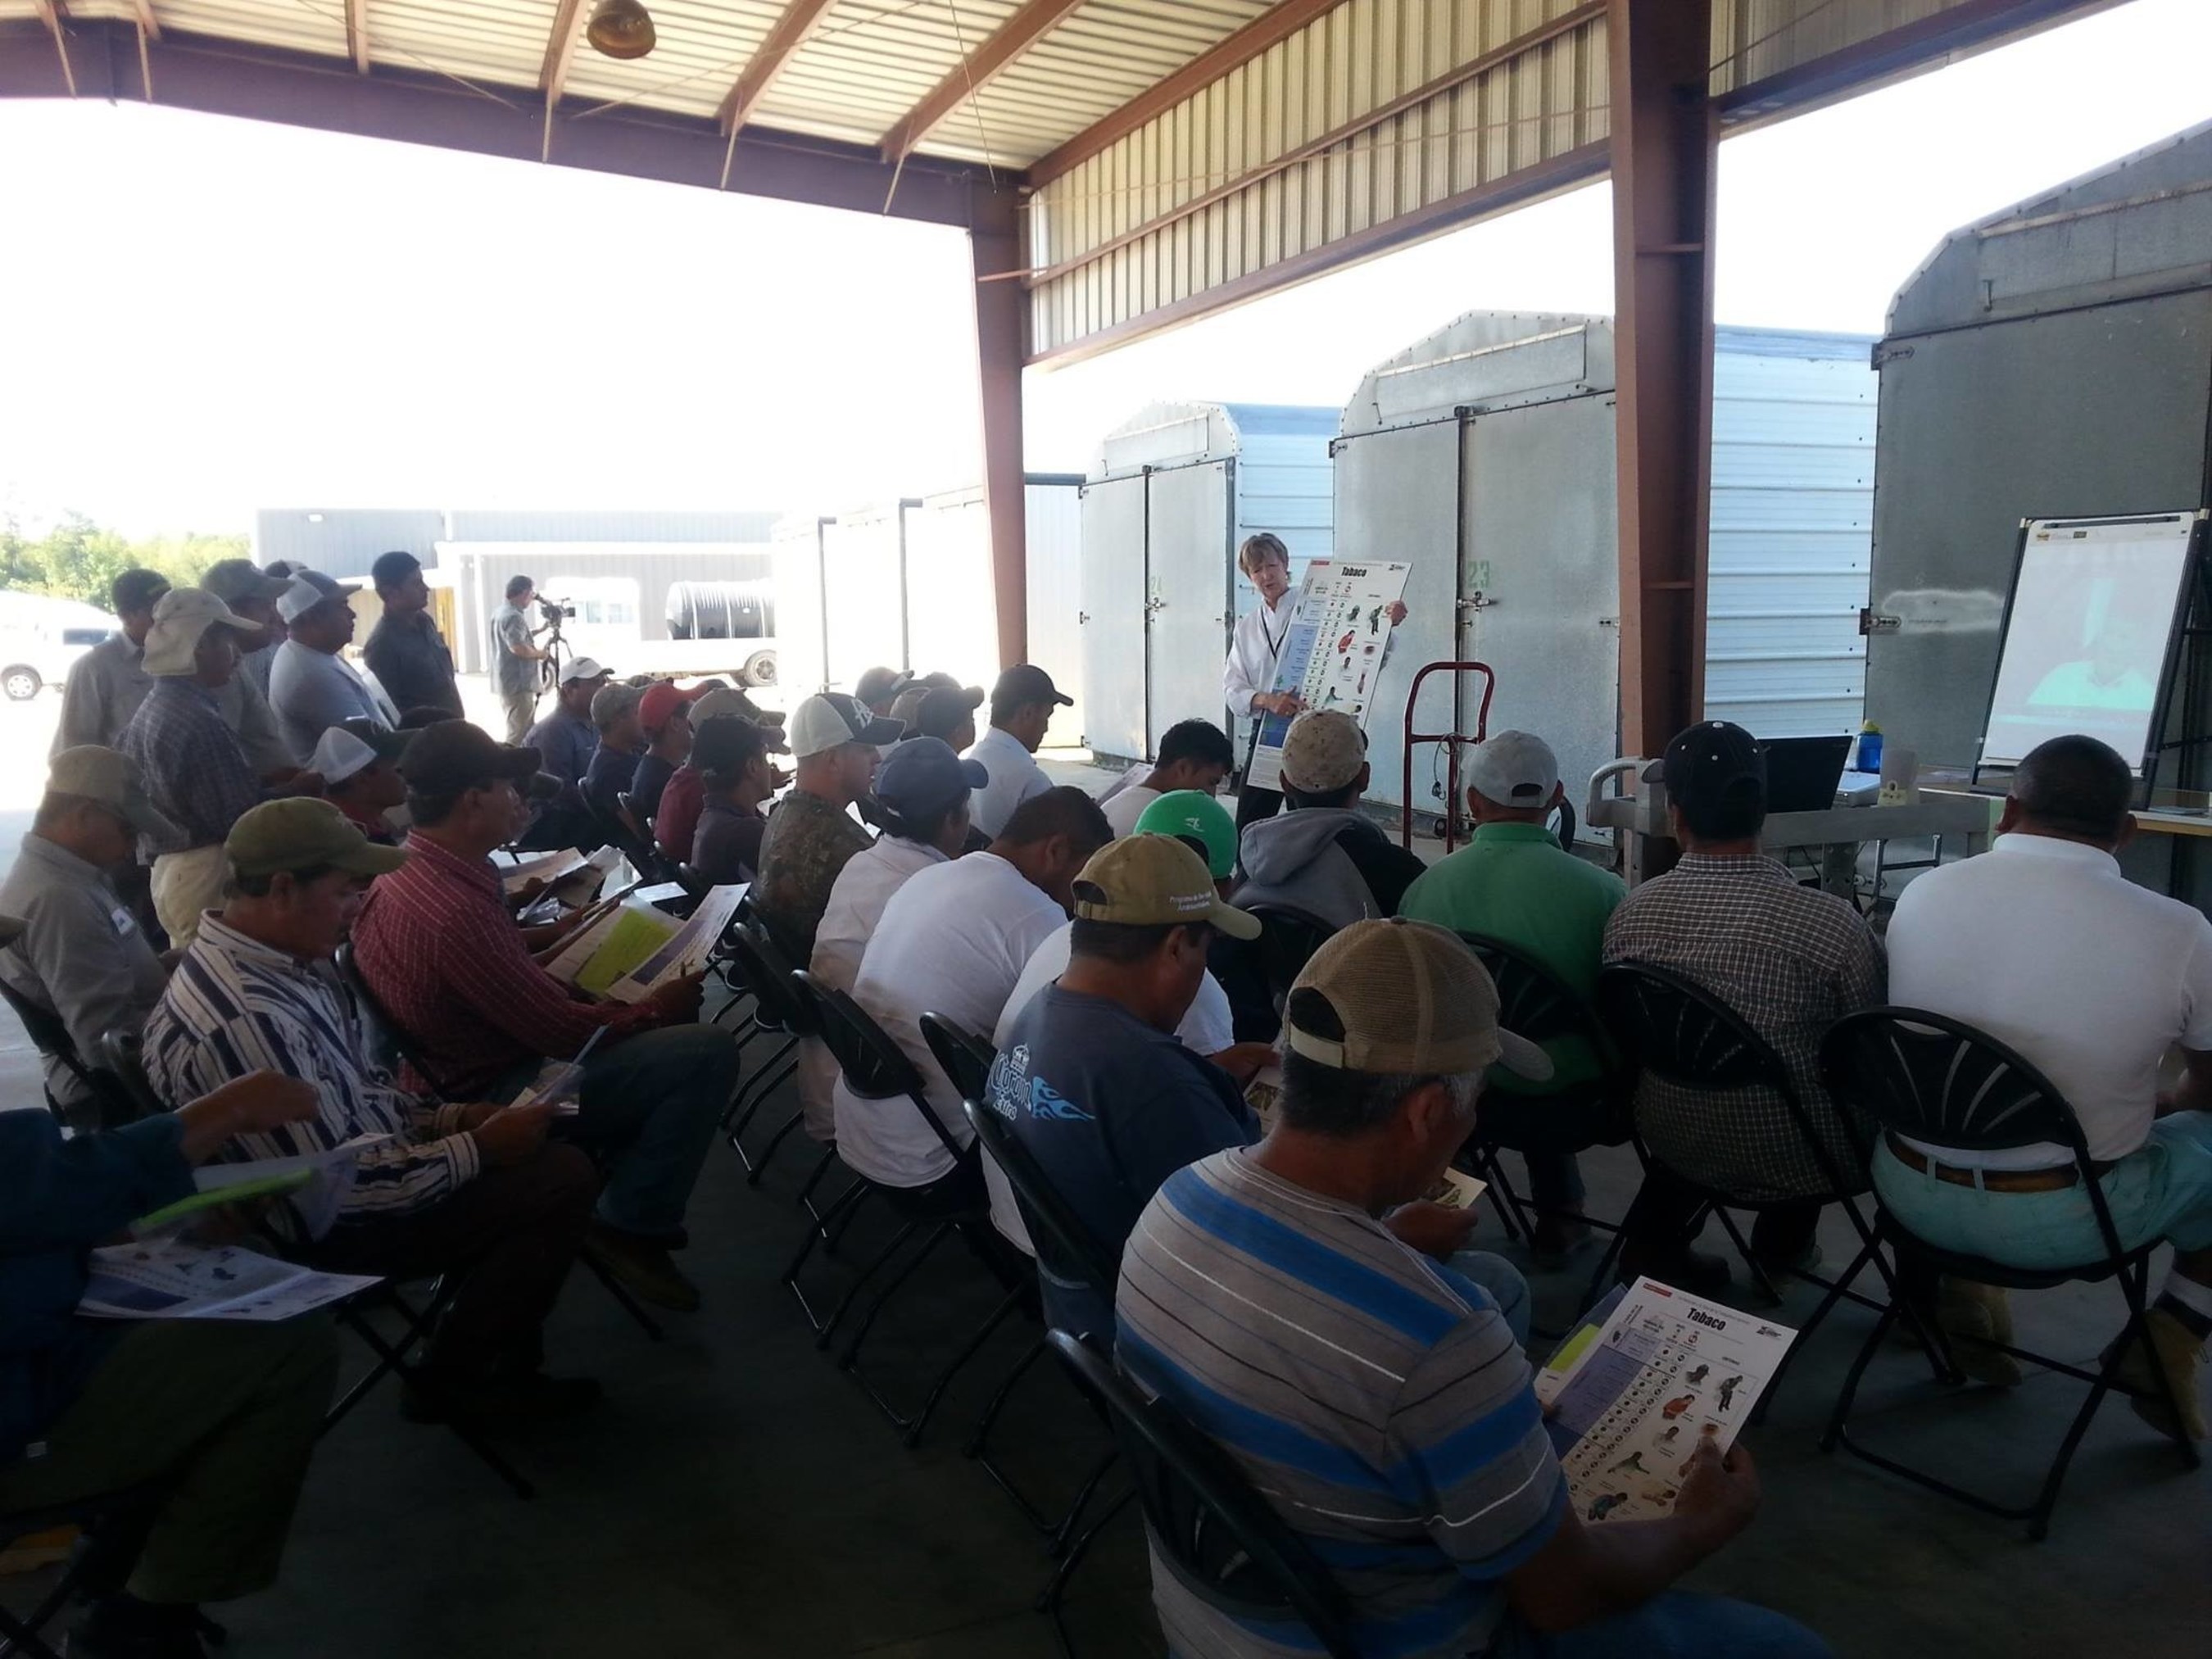 GAP Connections recently held a series of free, bilingual on-farm safety and compliance training events in Georgia, Kentucky and North Carolina